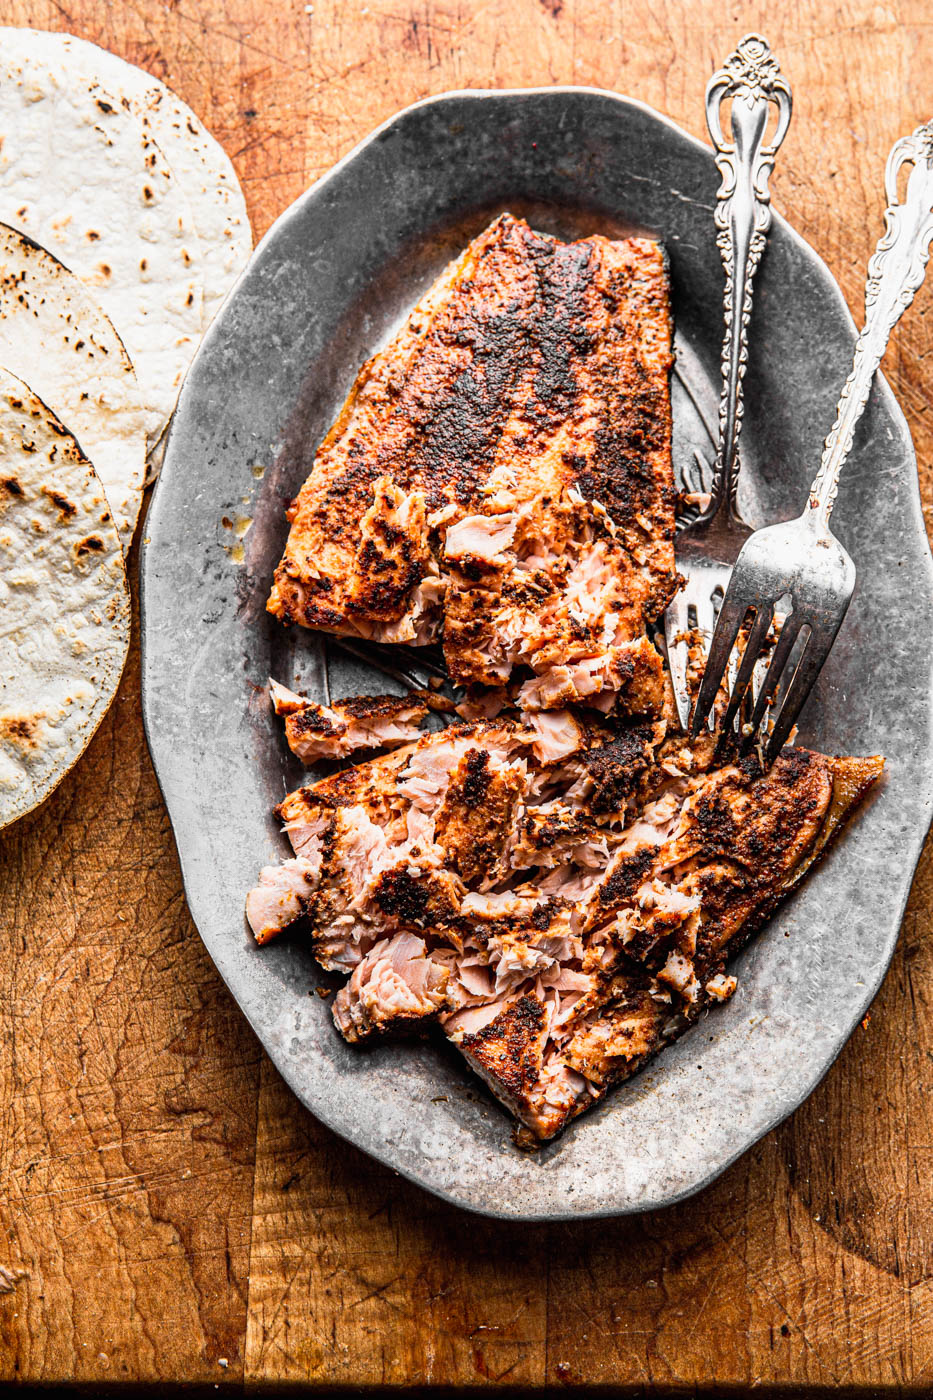 blackened seared salmon on a wooden board and silver platter with tortillas food photography